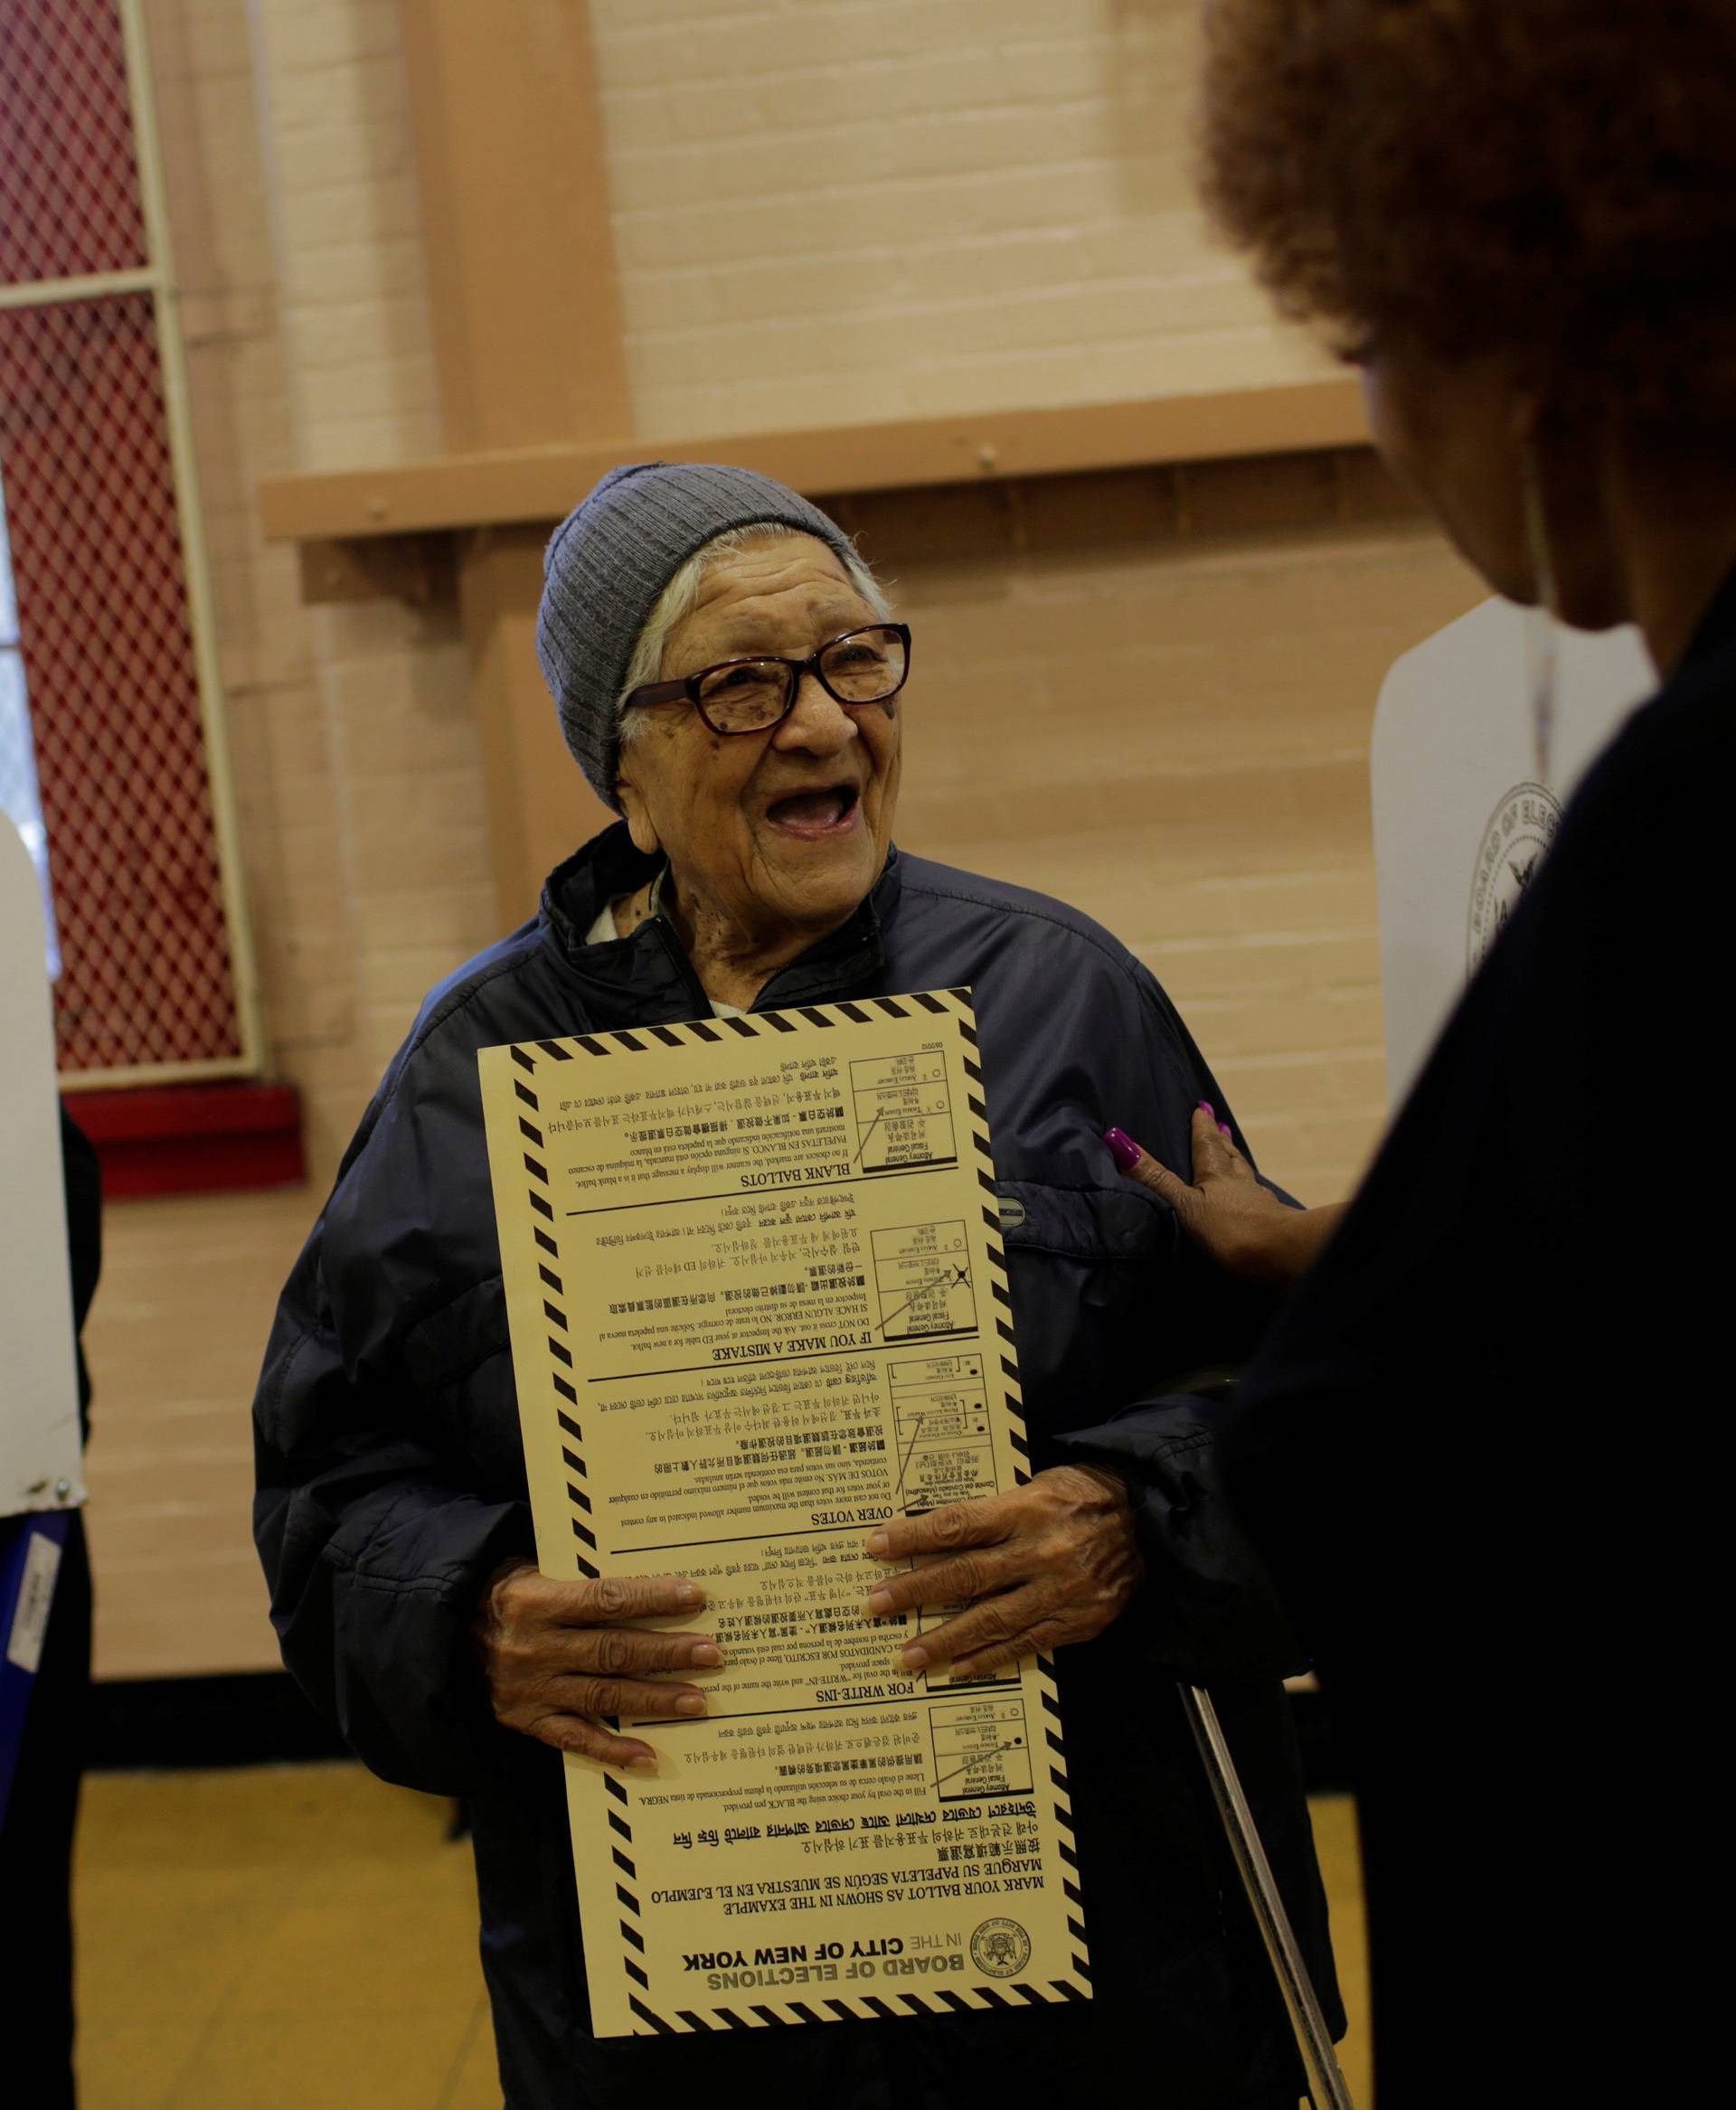 Teresa Lesama, originally from Nicaragua, is seen after casting her ballot during the U.S. presidential election at a polling station in the Bronx Borough of New York